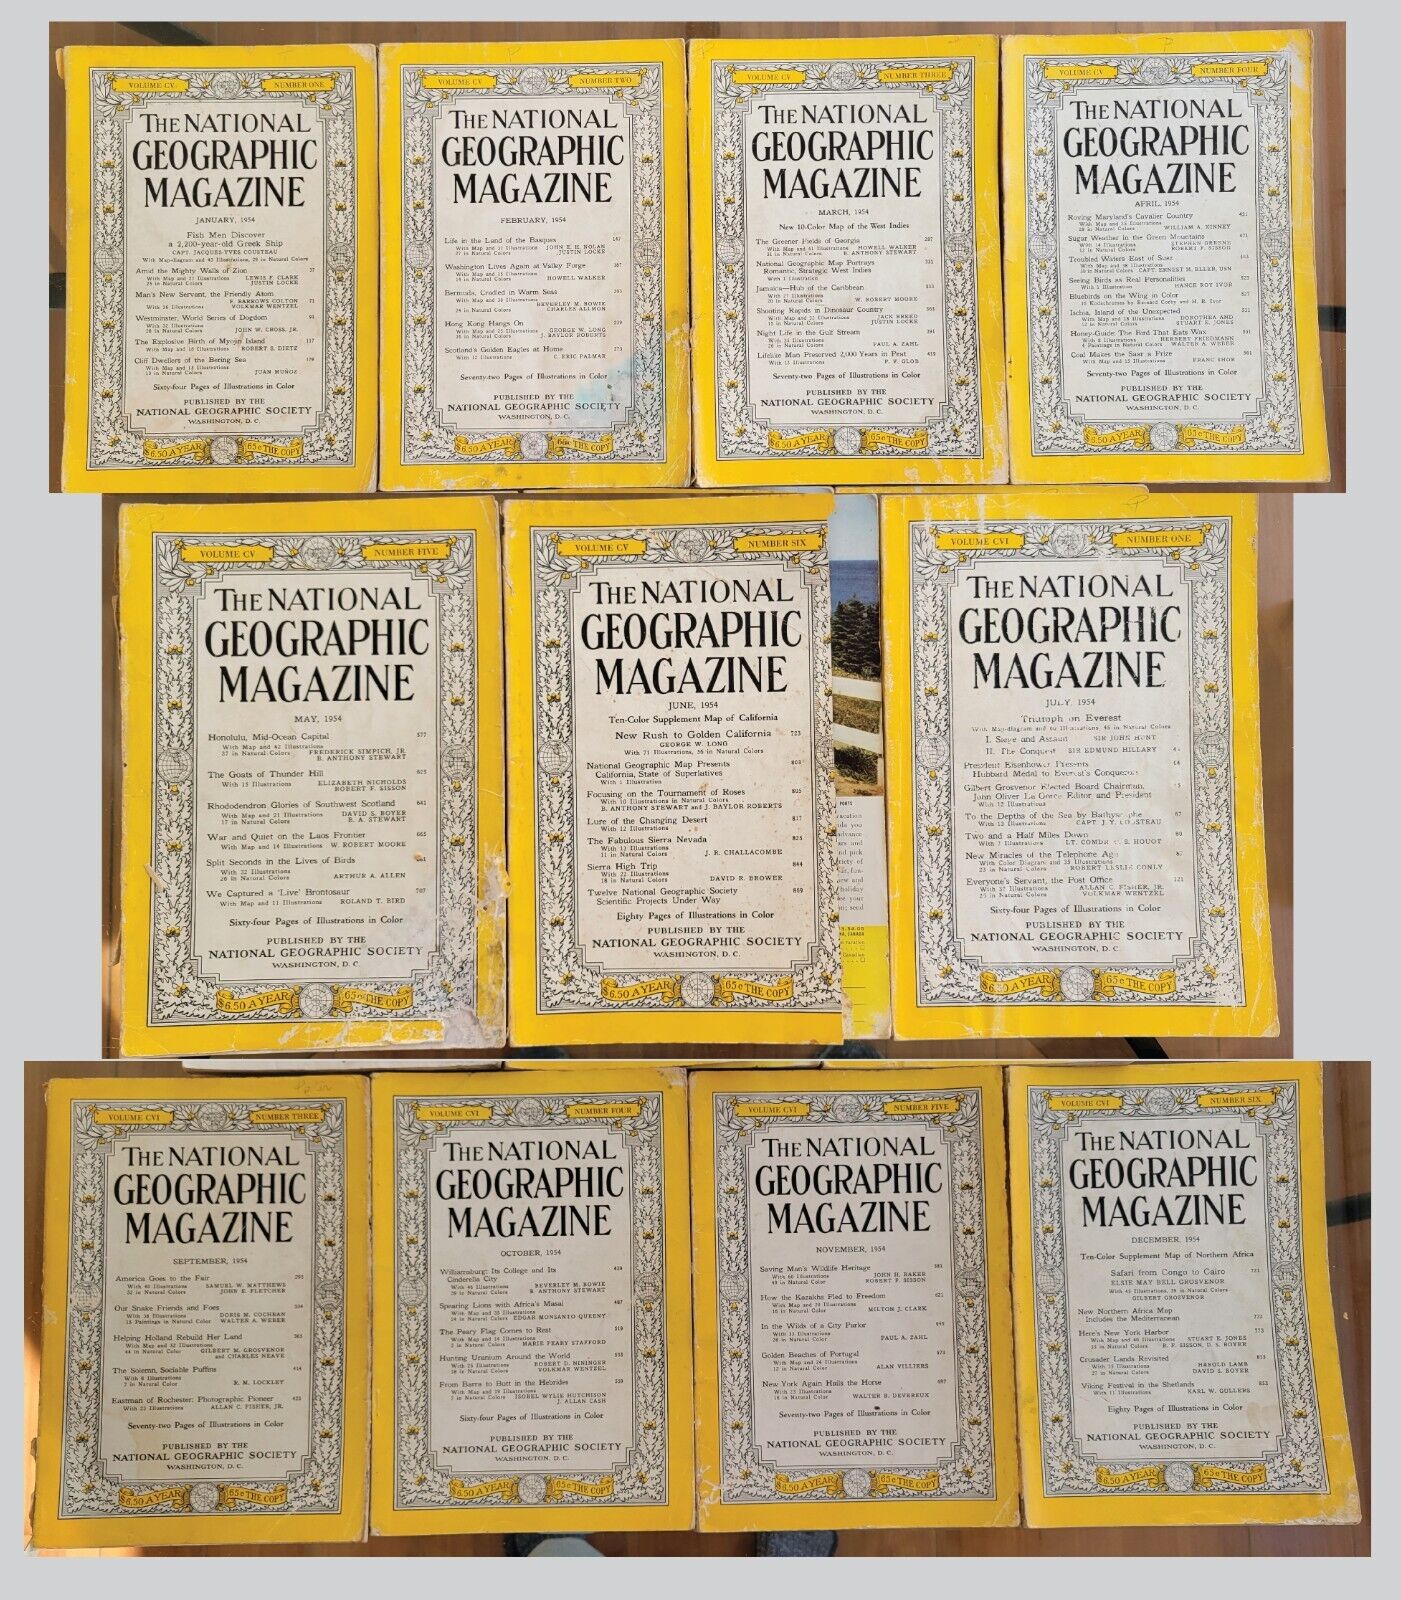 1954 National Geographic Magazines (11 issues, missing Aug) with 6 Coca-Cola Ads